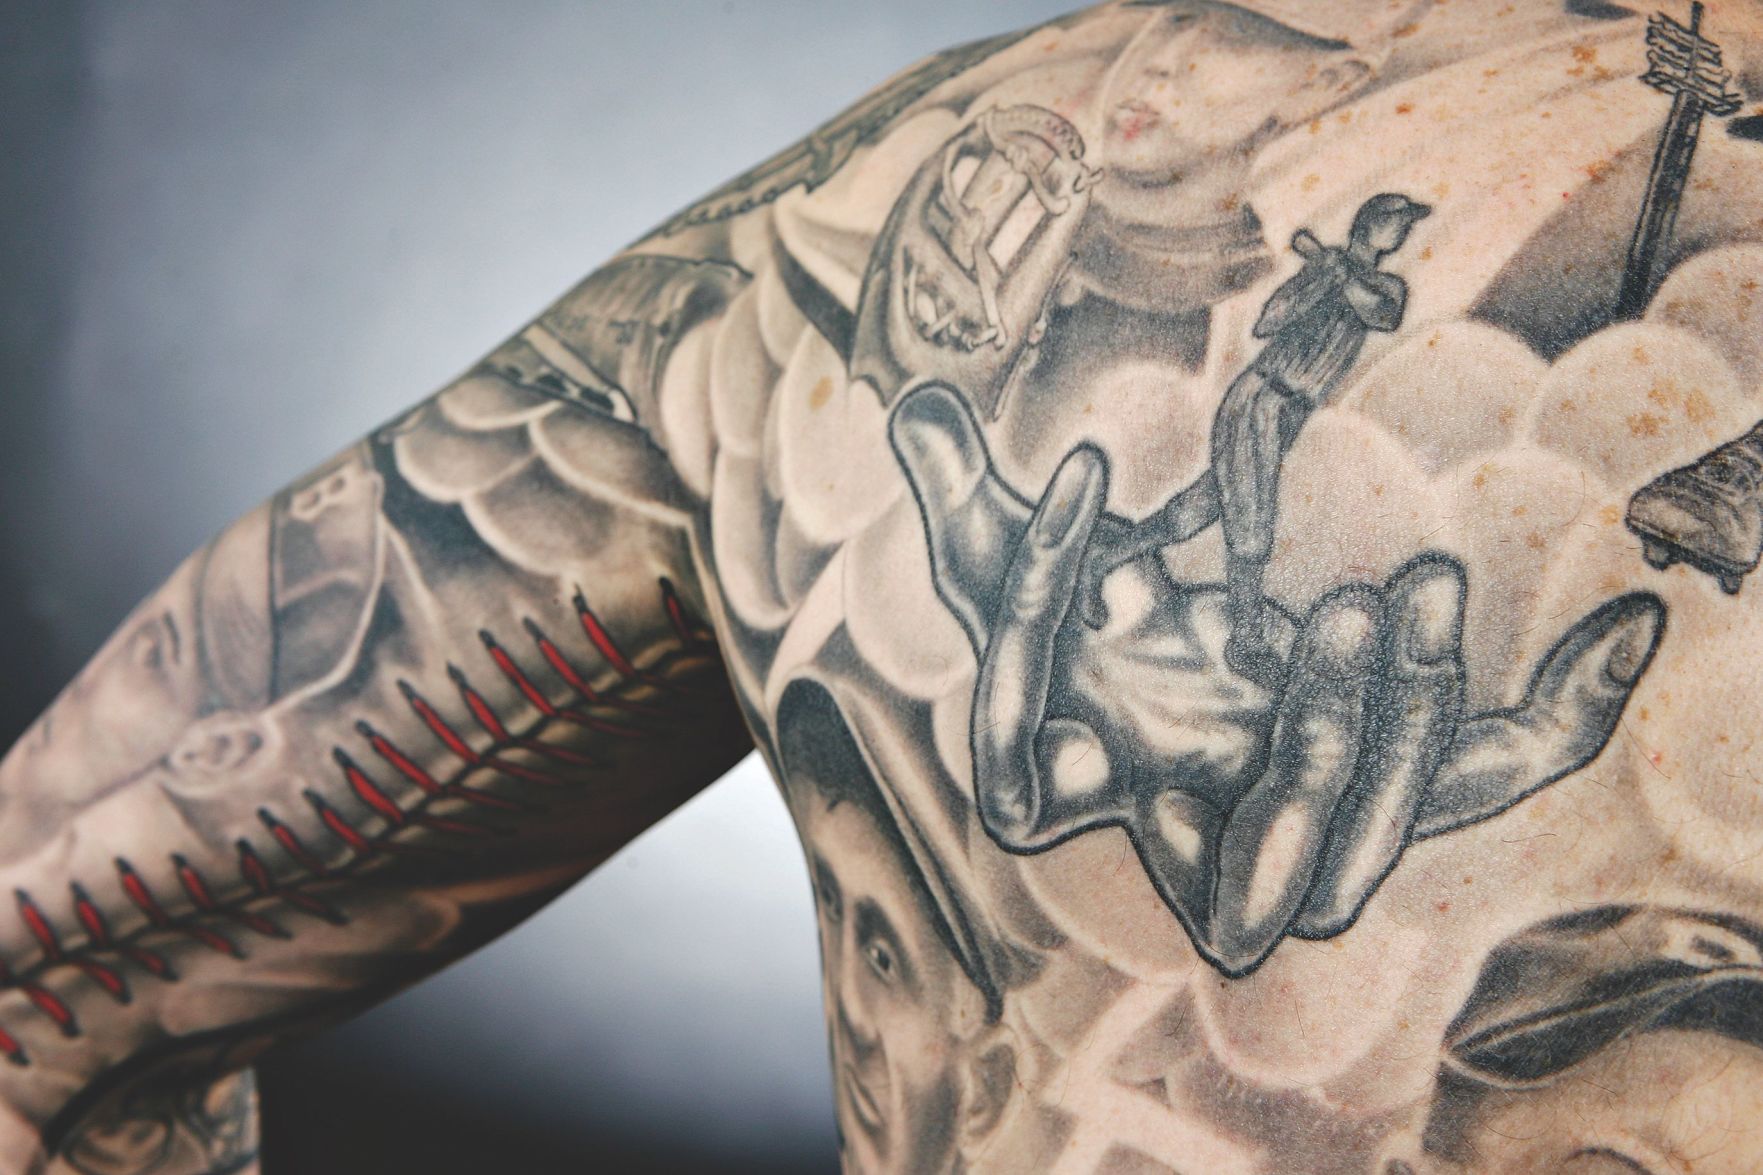 9 Stunning Sports Tattoo Design Ideas For Men  Styles At Life